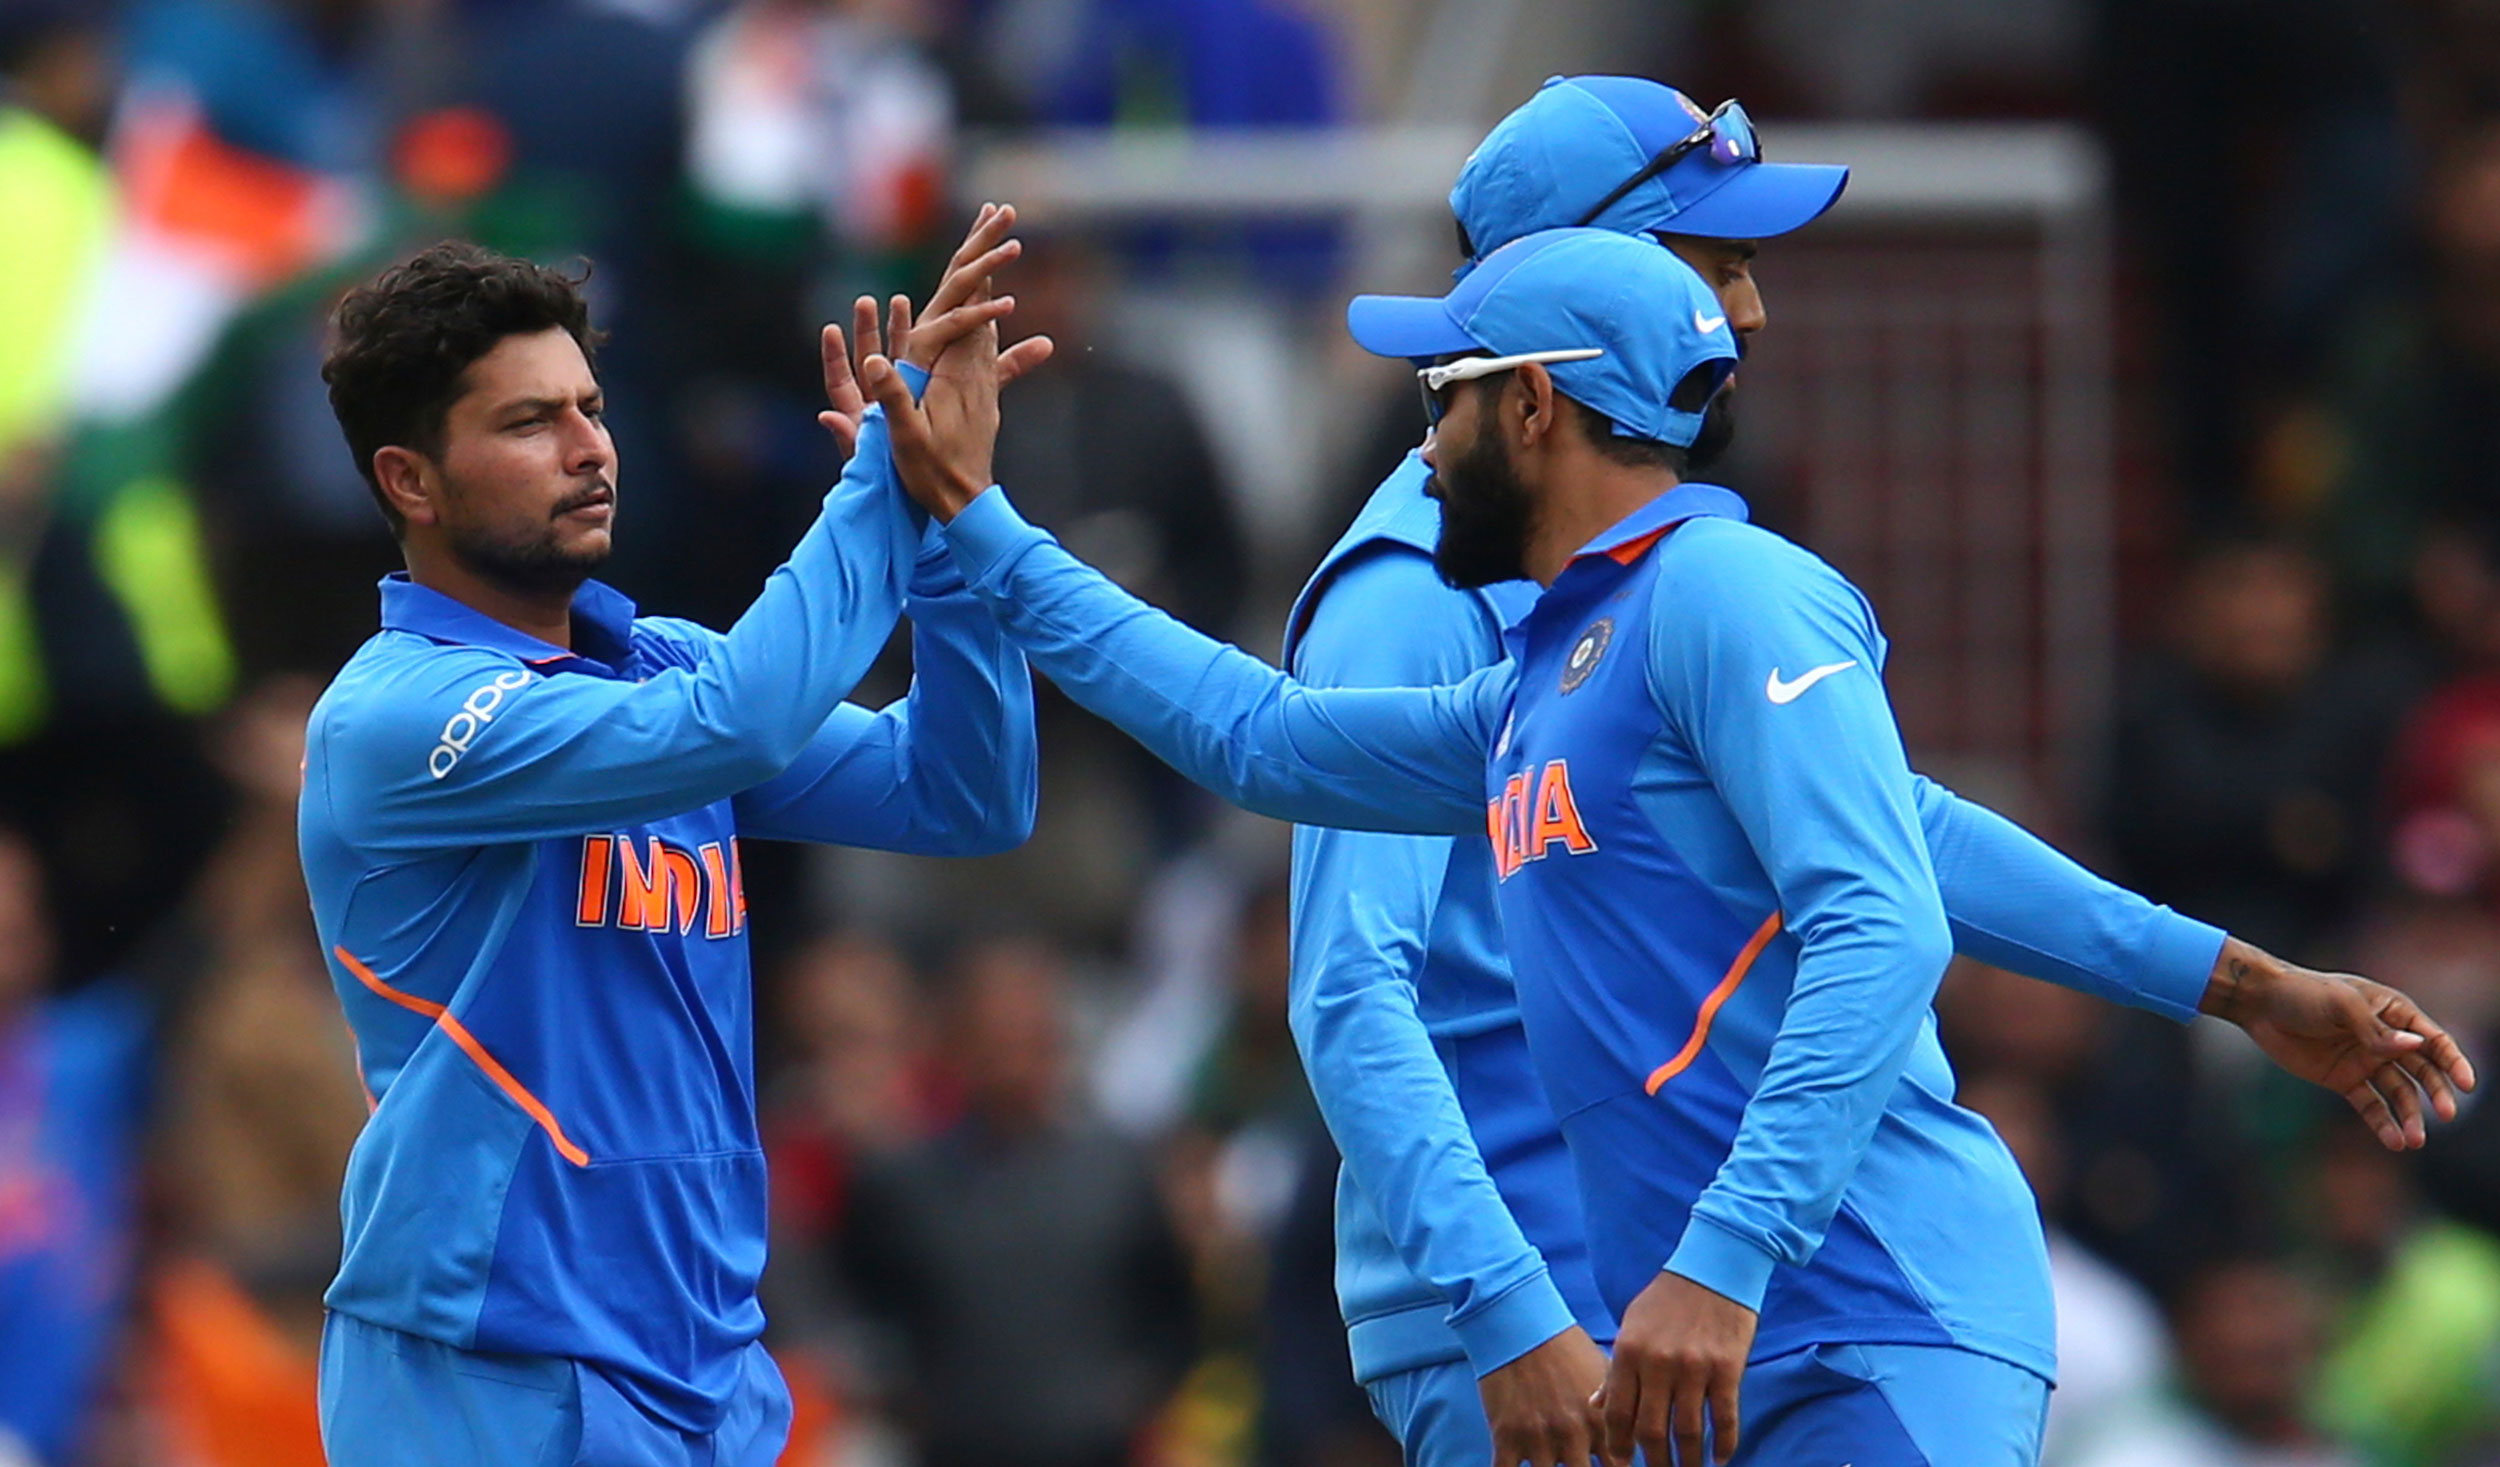 Kuldeep Yadav (left) celebrates after taking the wicket of Pakistan's Babar Azam during the ICC Cricket World Cup match between India and Pakistan at Old Trafford in Manchester, England, on June 16, 2019. 